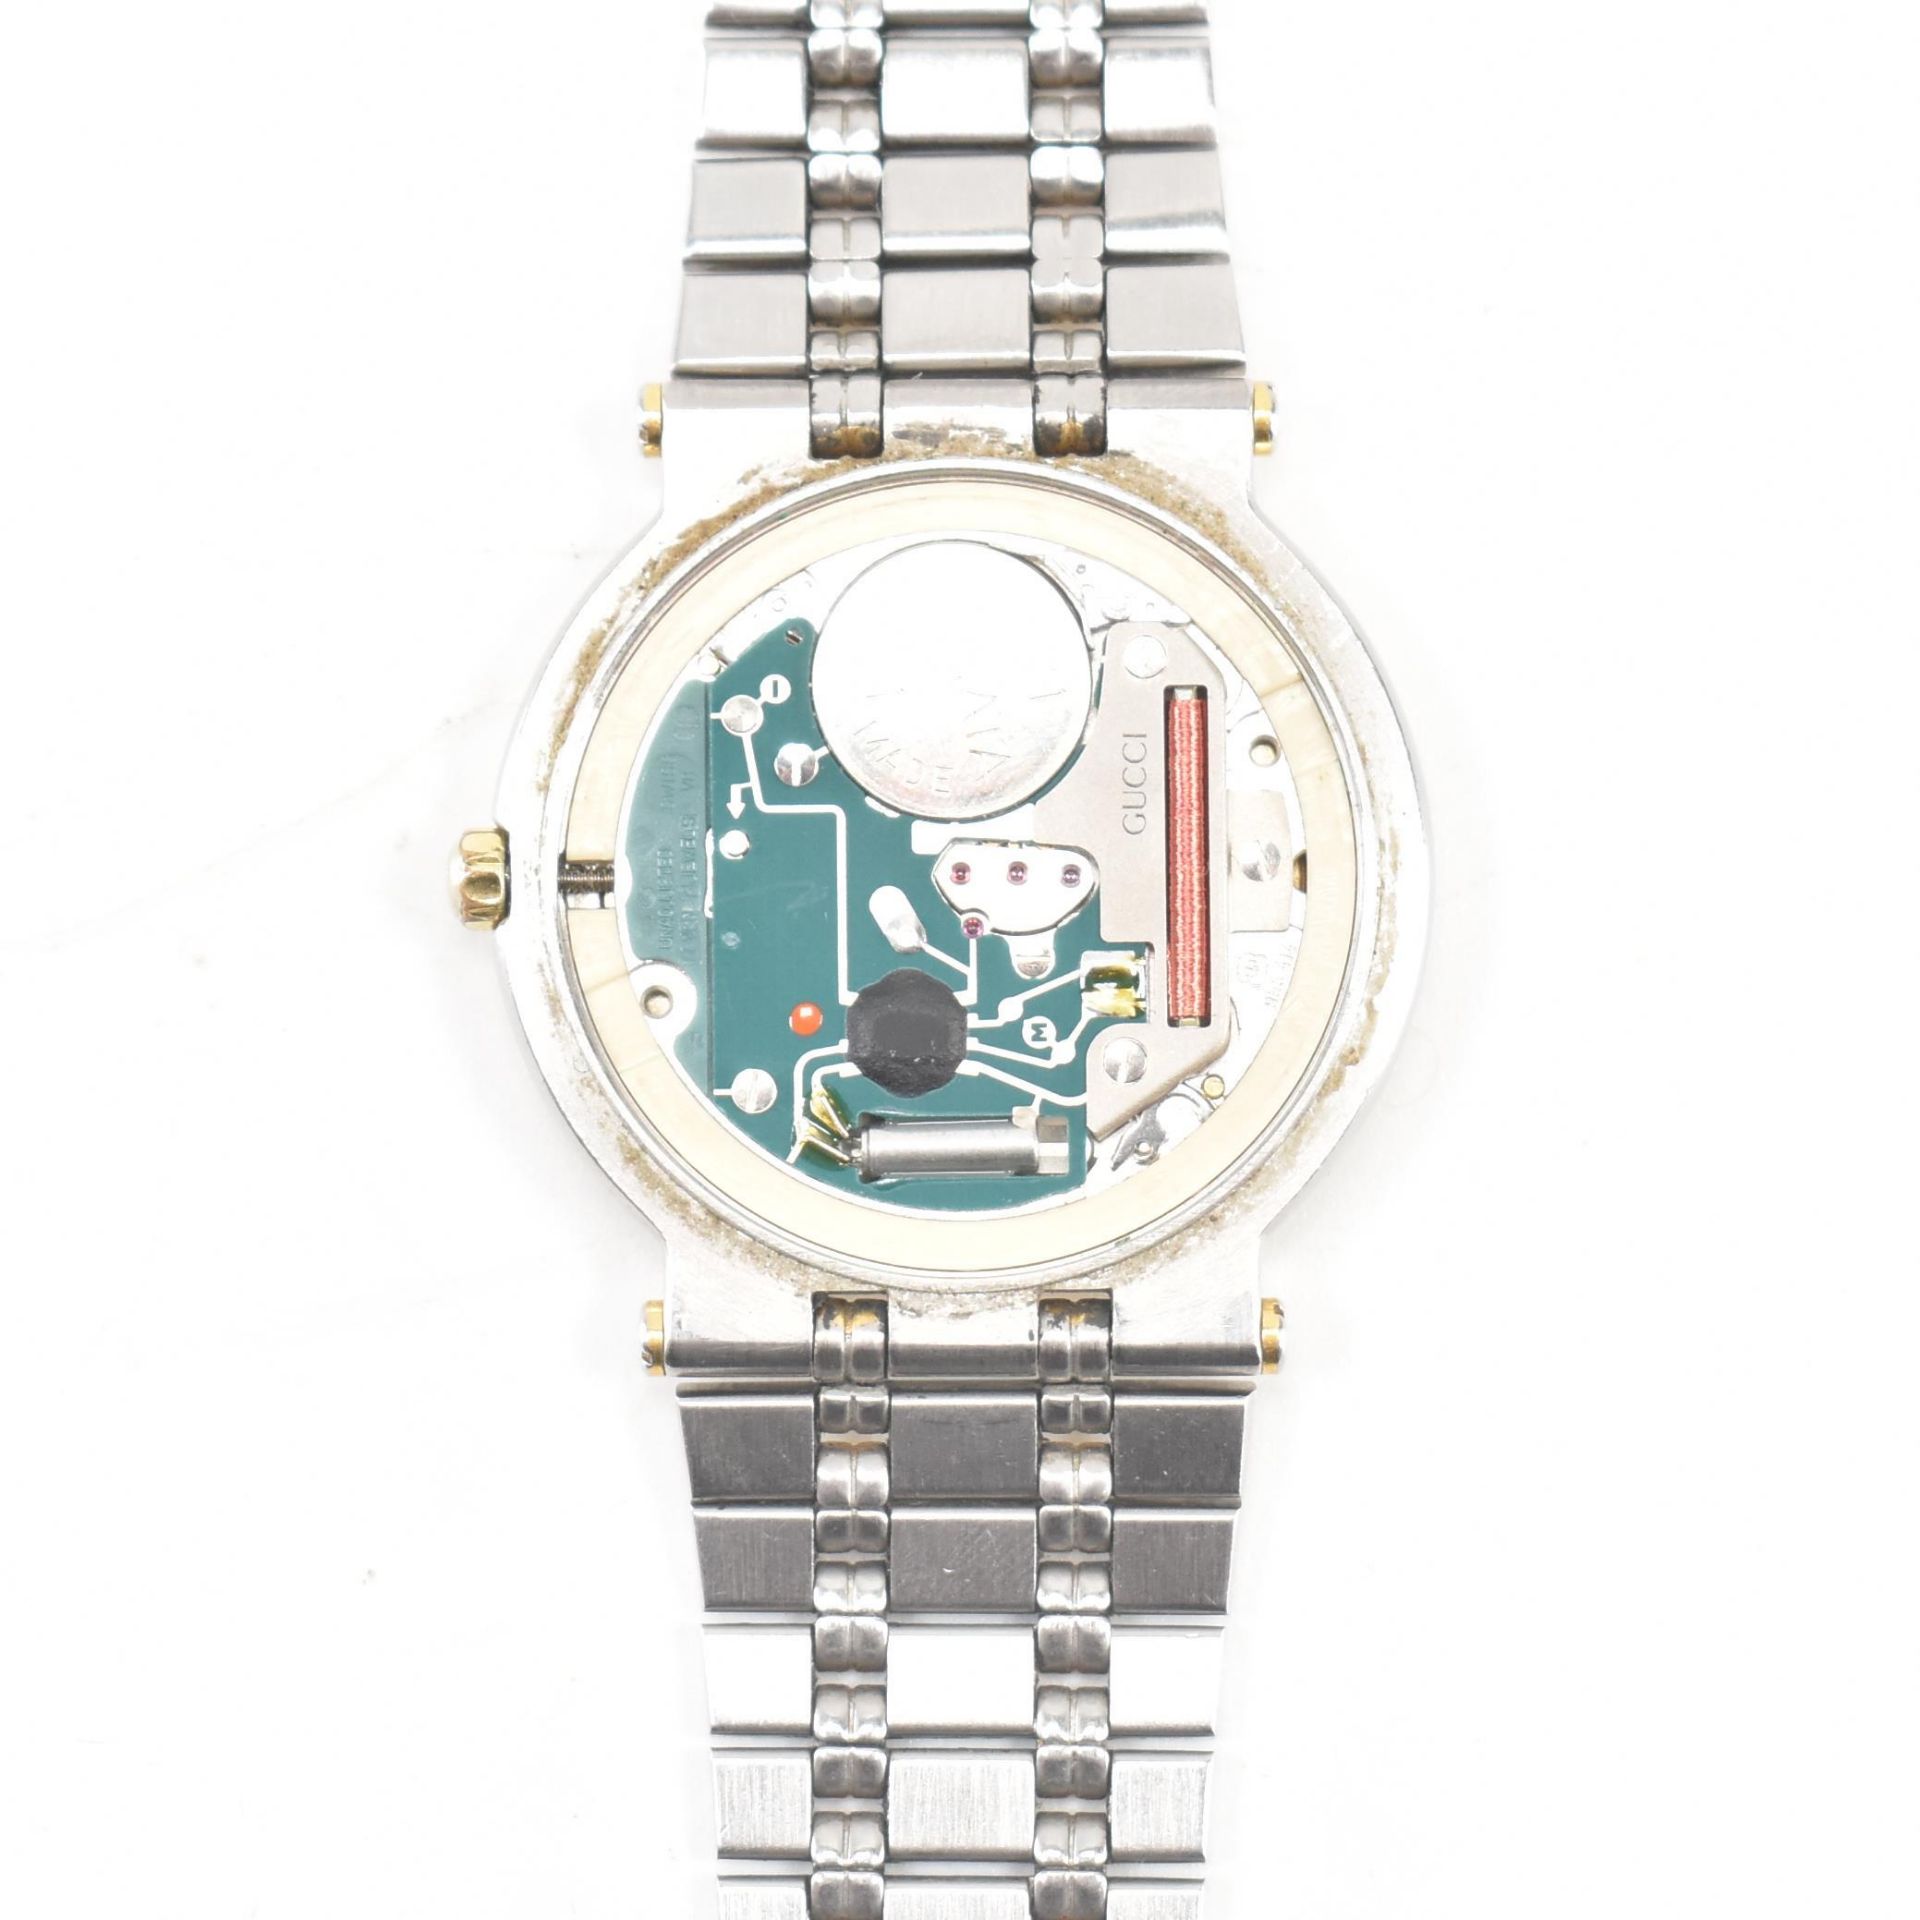 VINTAGE GUCCI TWO TONE SWISS MADE WRIST WATCH - Image 3 of 5